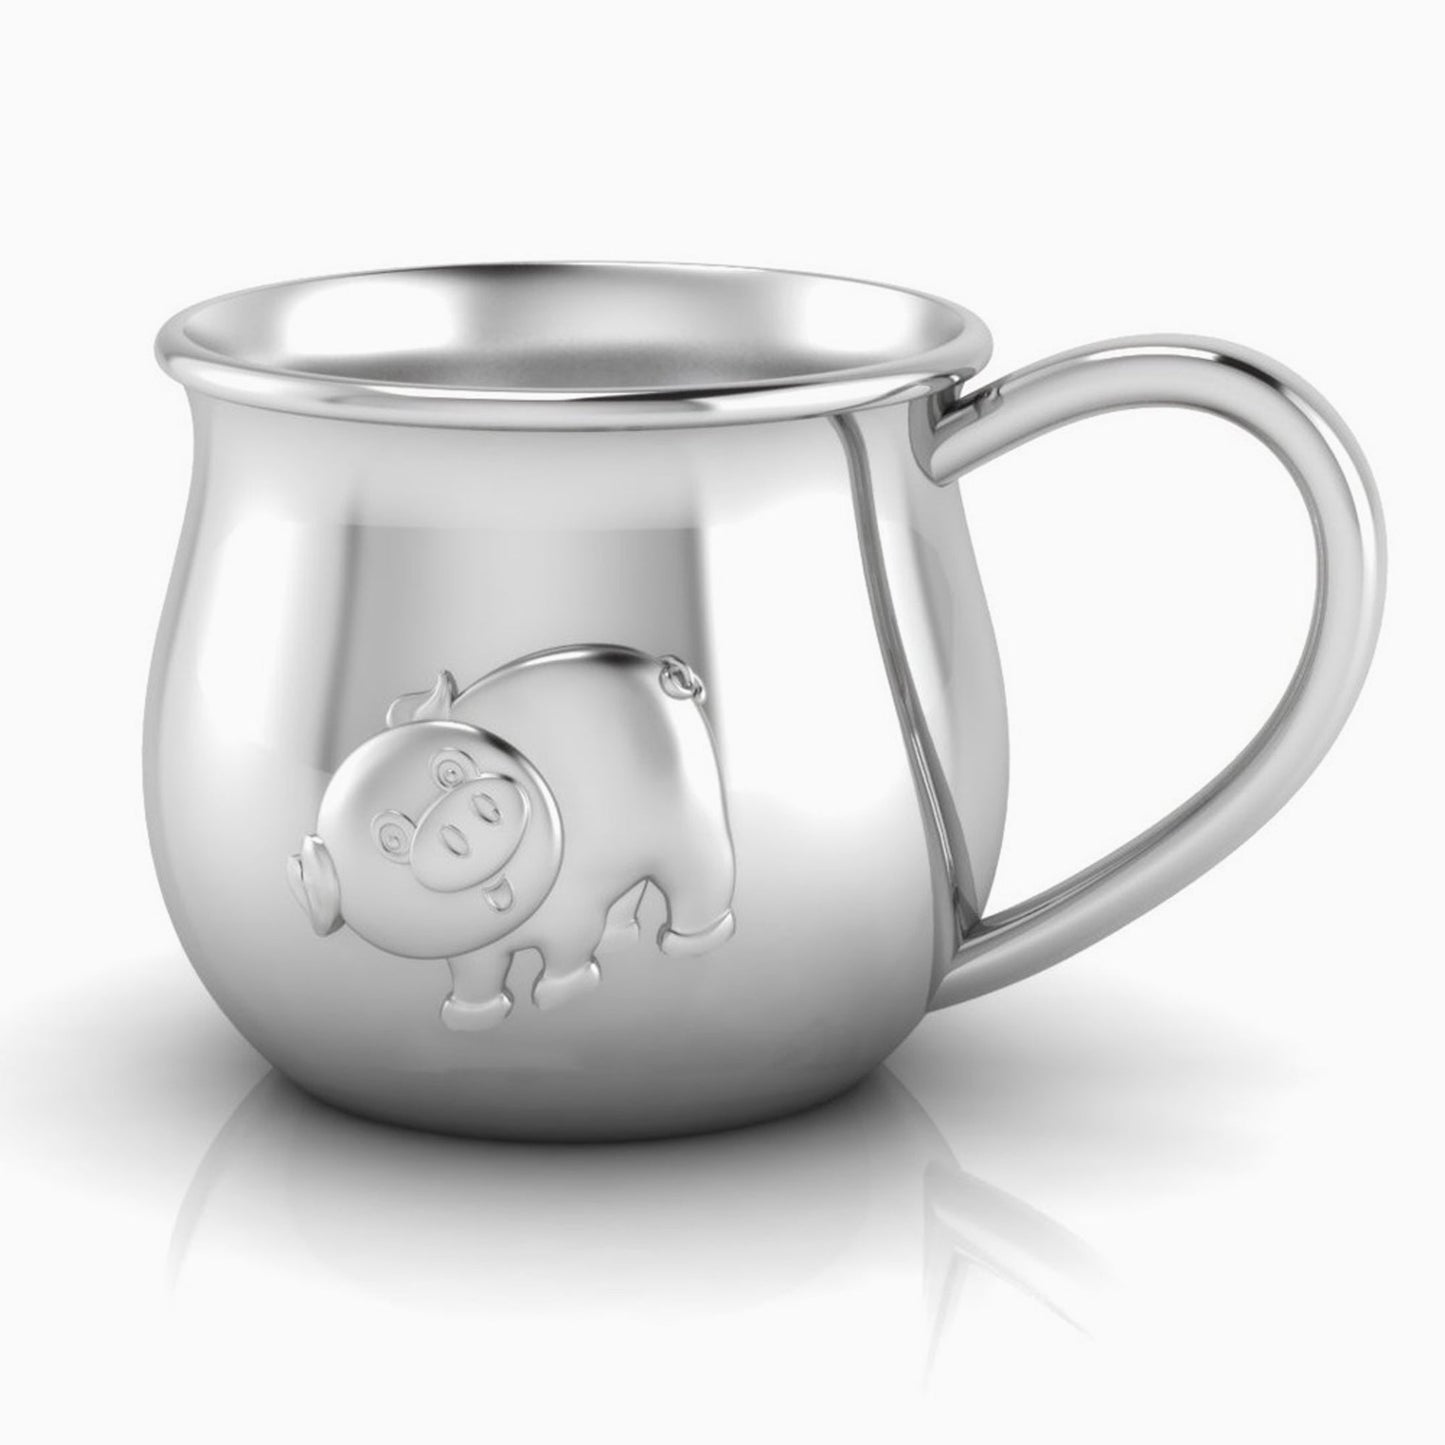 Silver Plated Piggy Baby Cup by Krysaliis